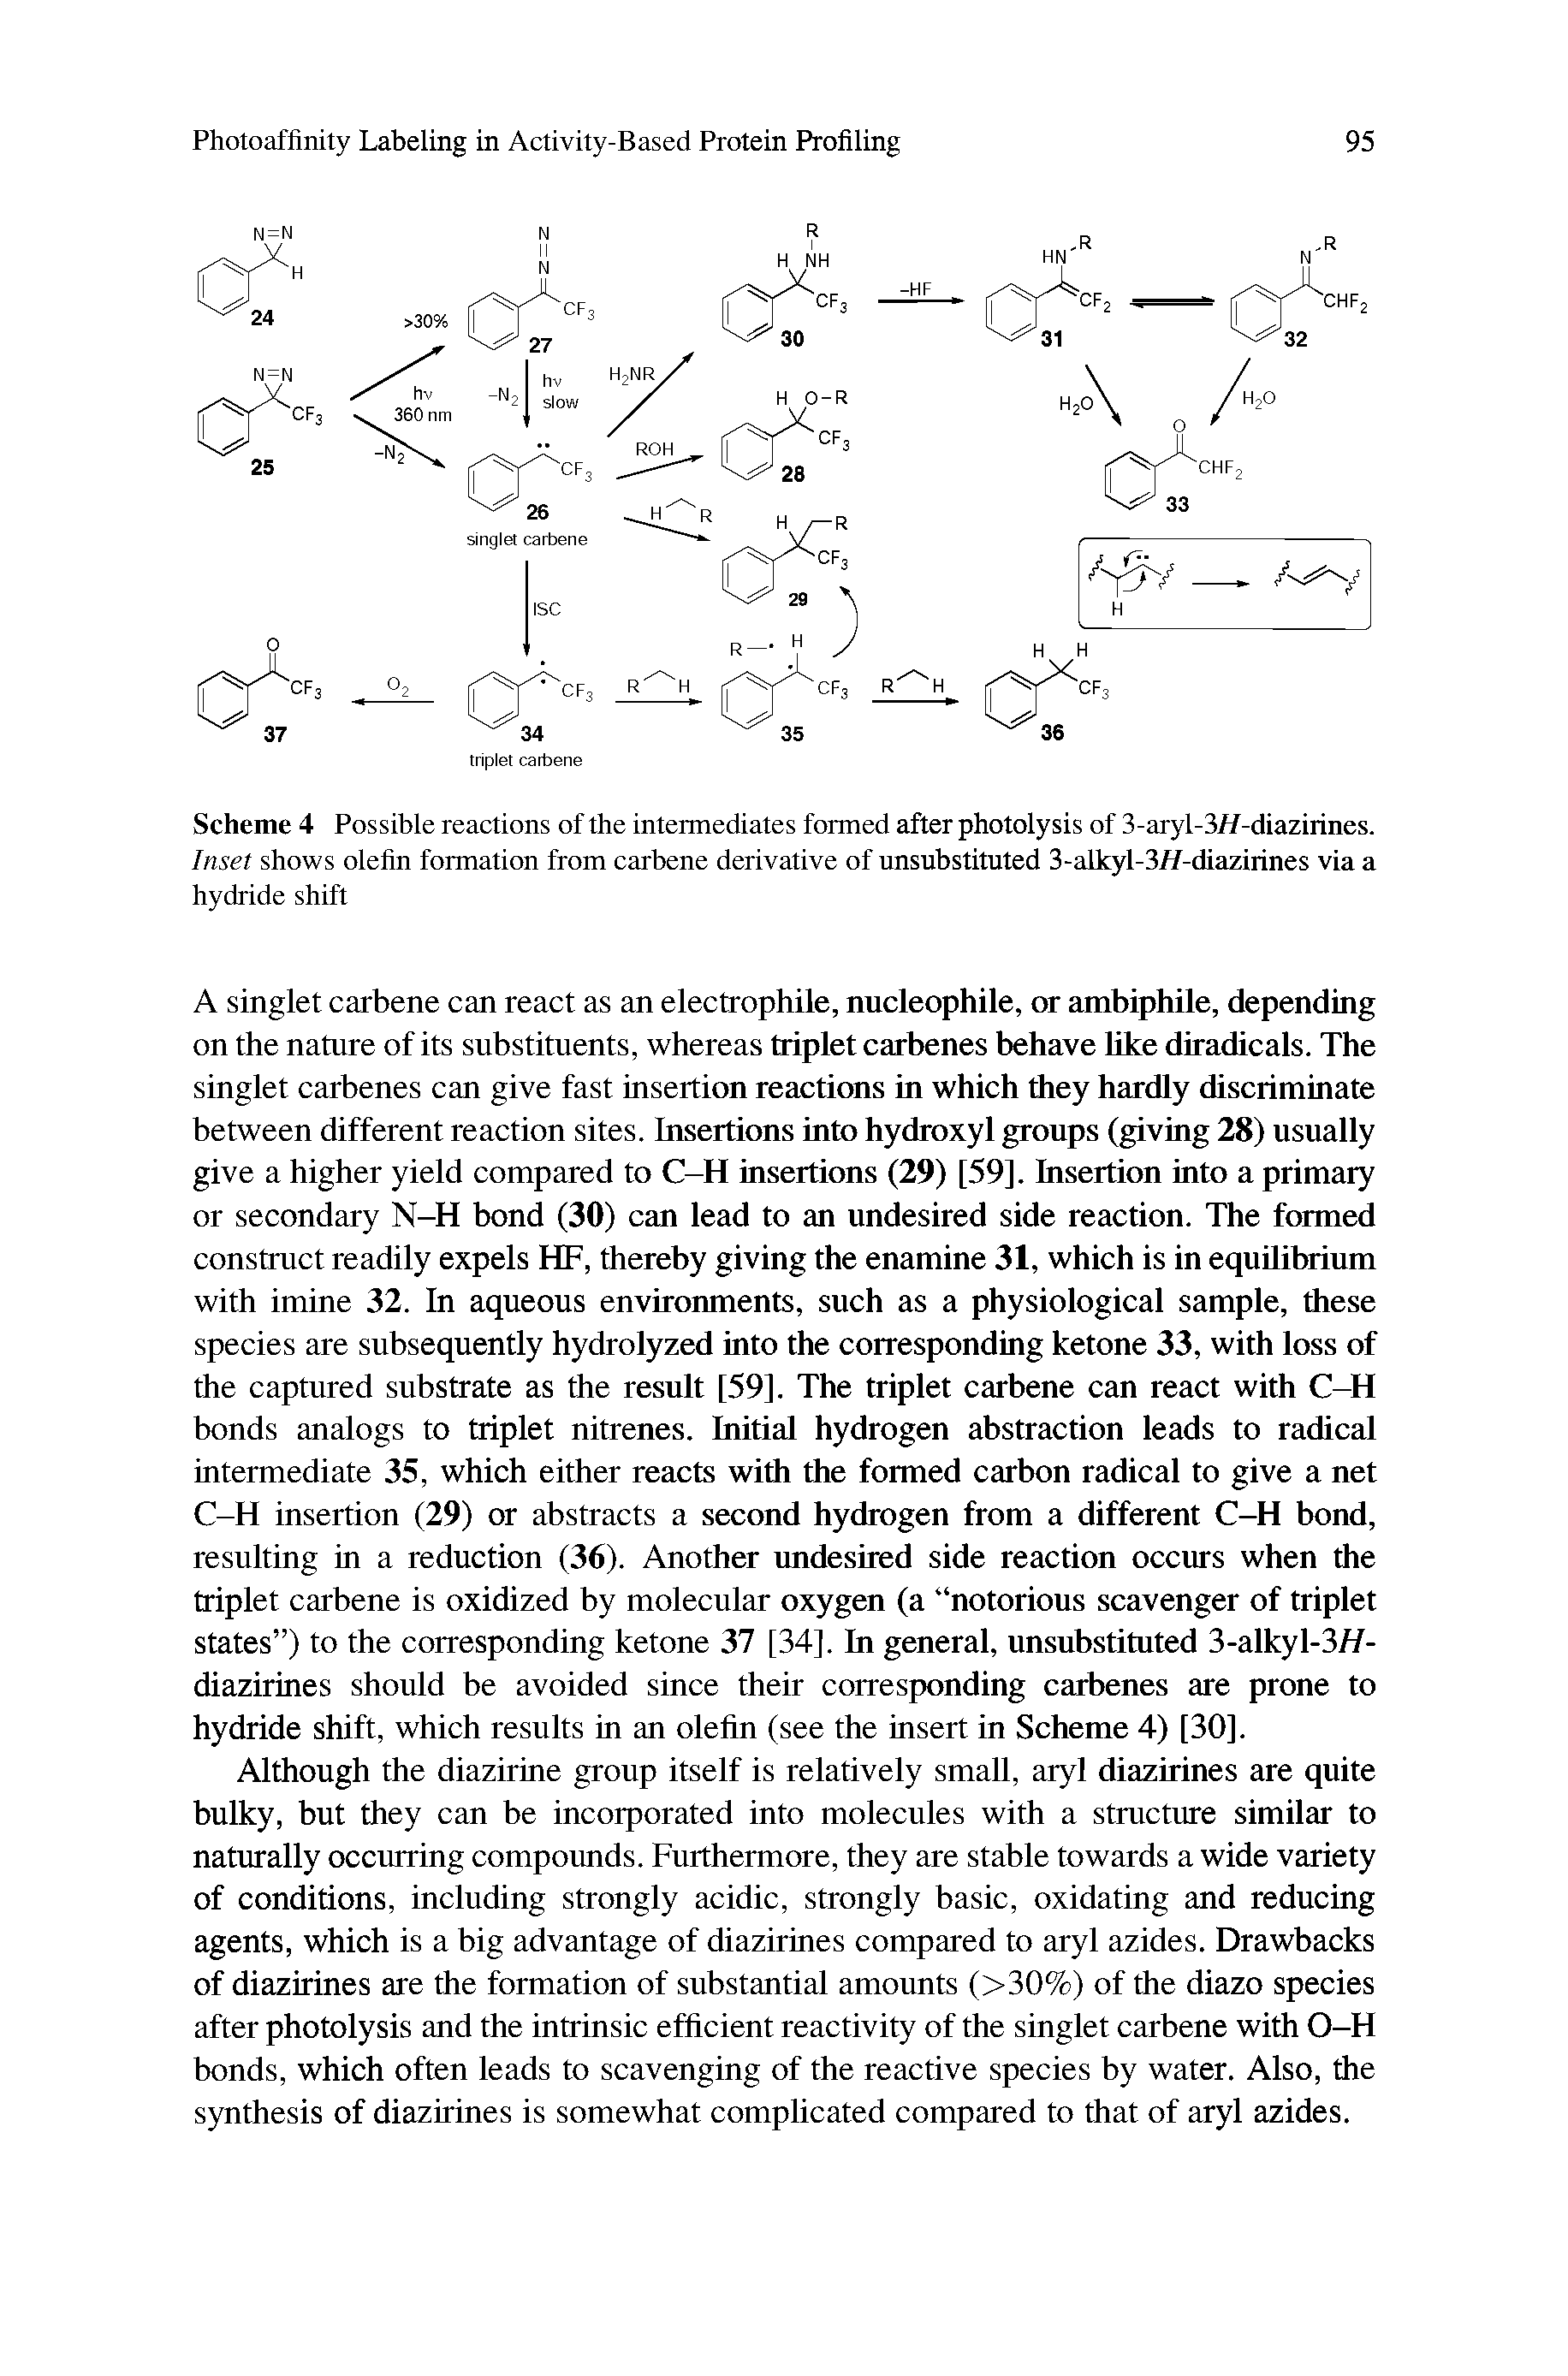 Scheme 4 Possible reactions of the intermediates formed after photolysis of 3-aryl-3//-diazirines. Inset shows olefin formation from carbene derivative of unsubstituted 3-alkyl-3//-diazirines via a hydride shift...